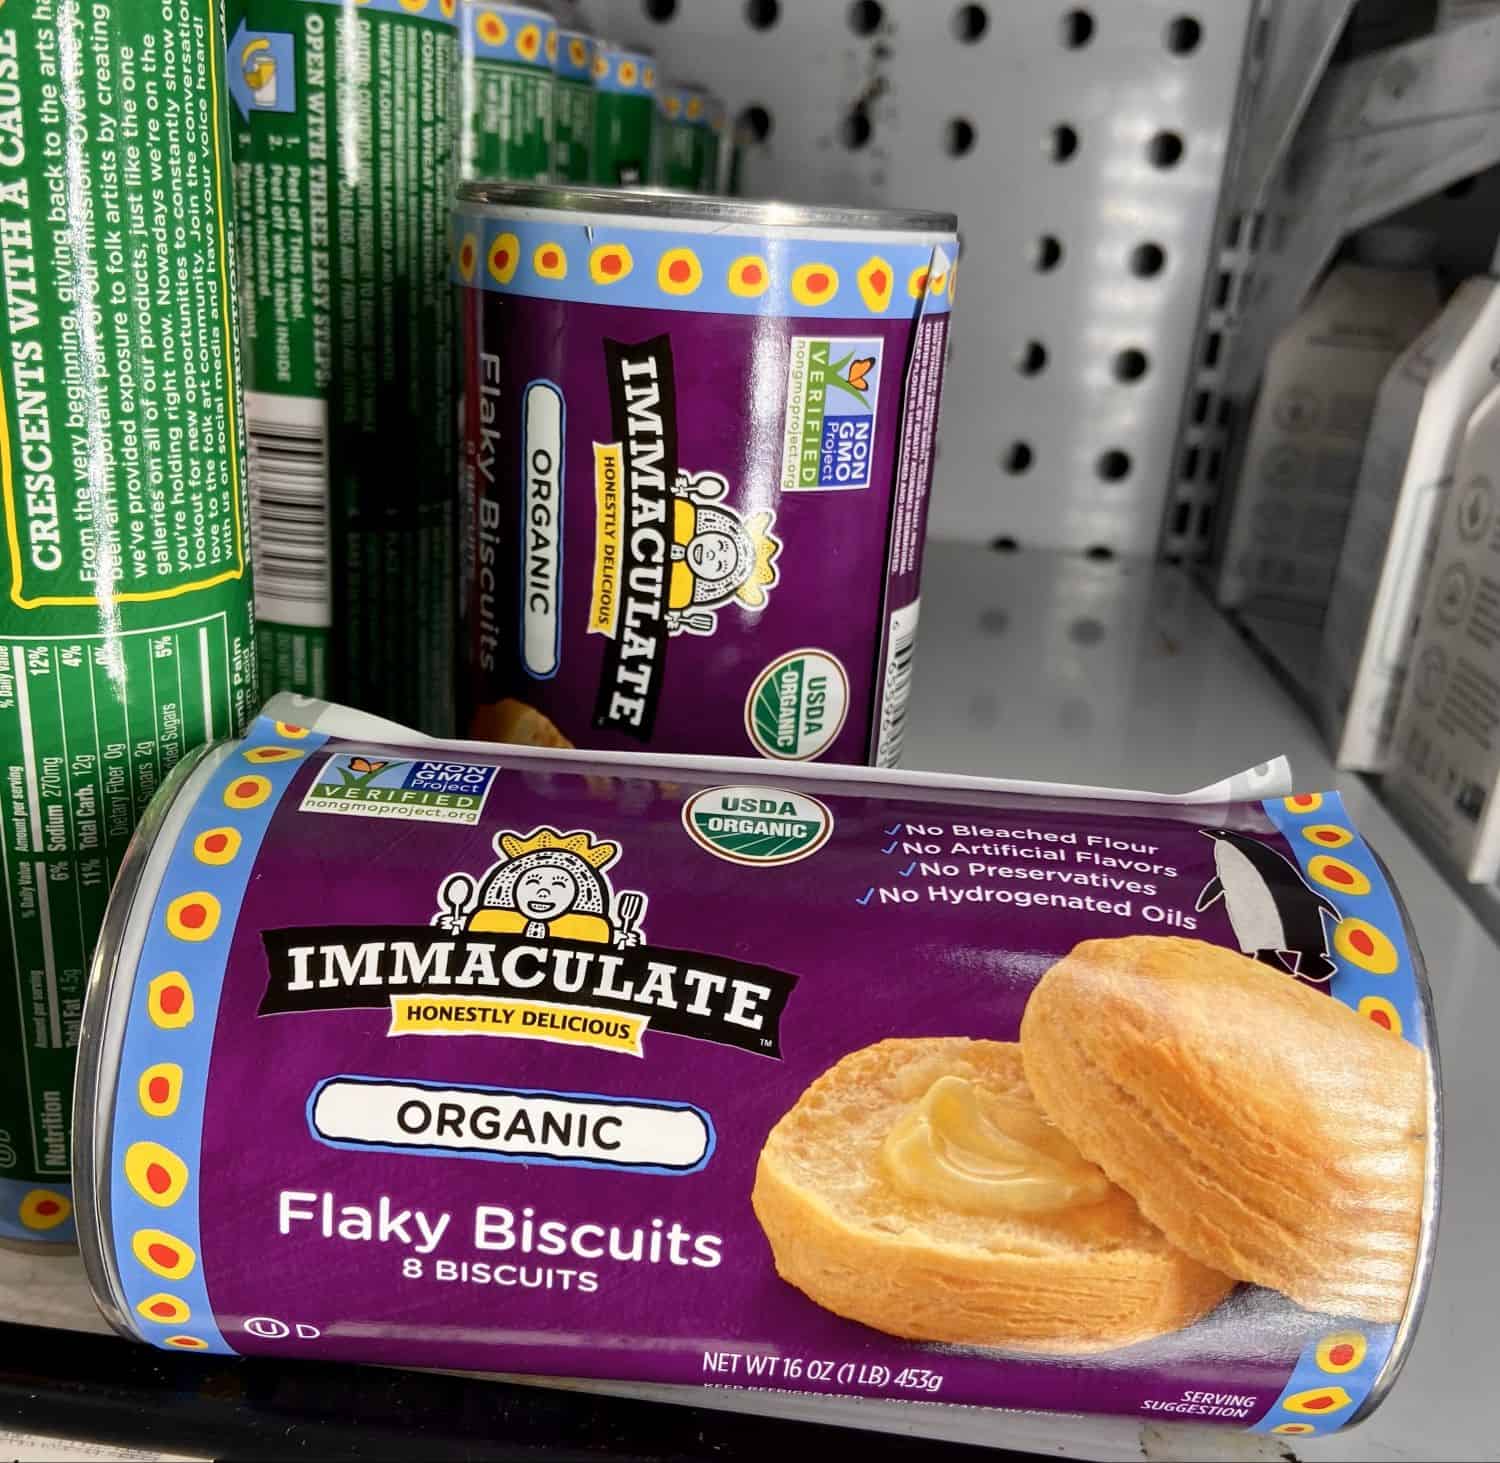 Immaculate Organic Flaky Biscuits